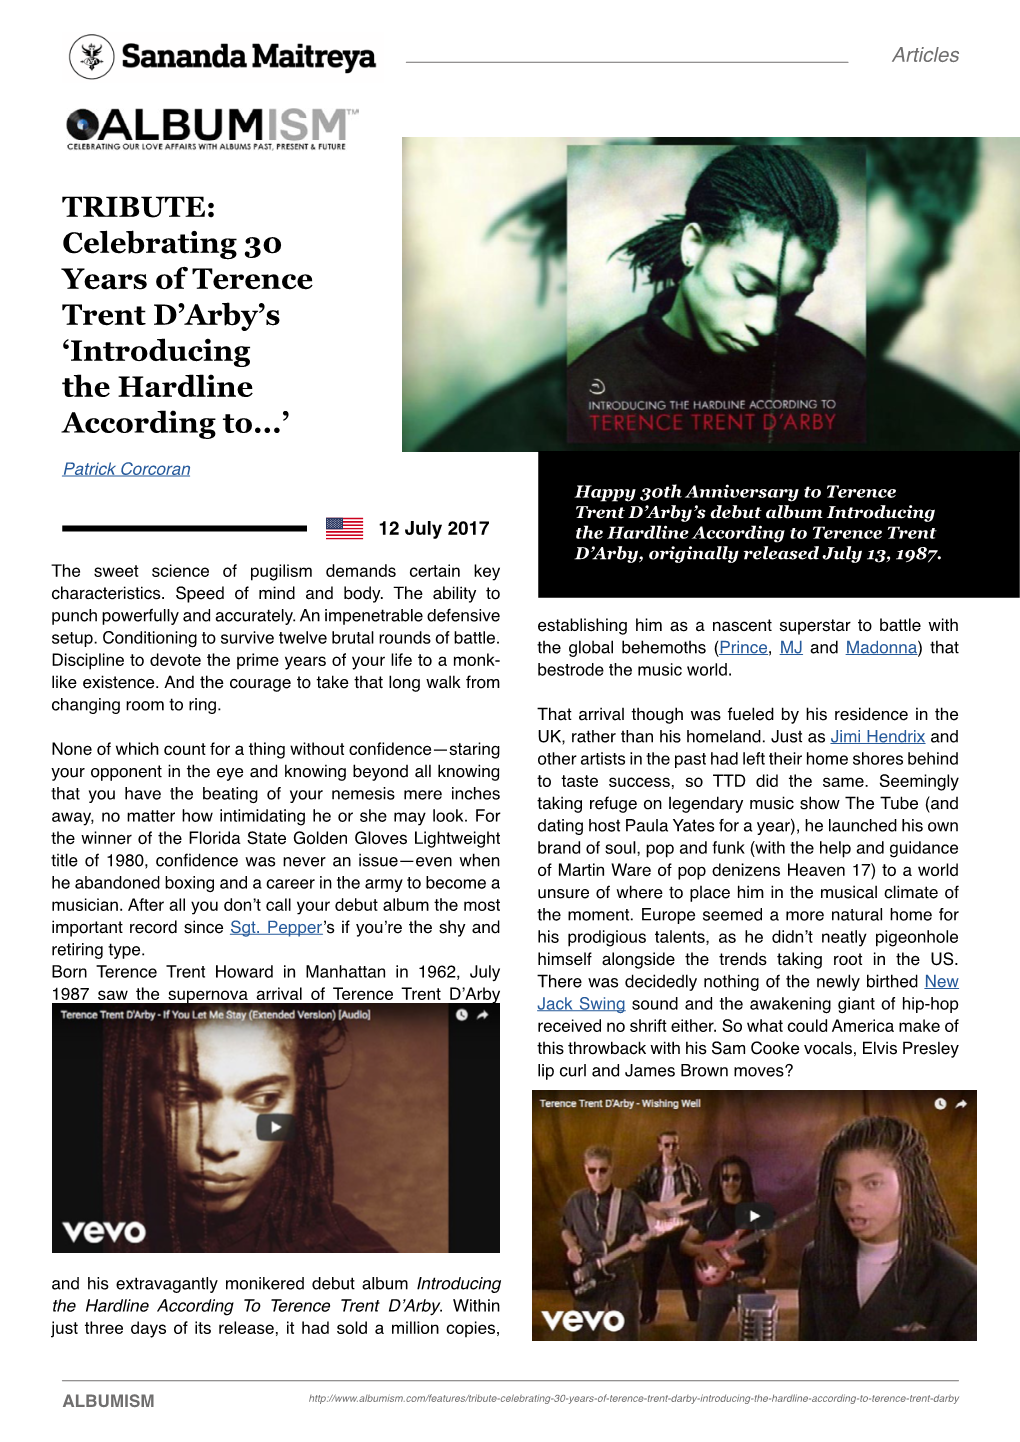 TRIBUTE: Celebrating 30 Years of Terence Trent D'arby's 'Introducing